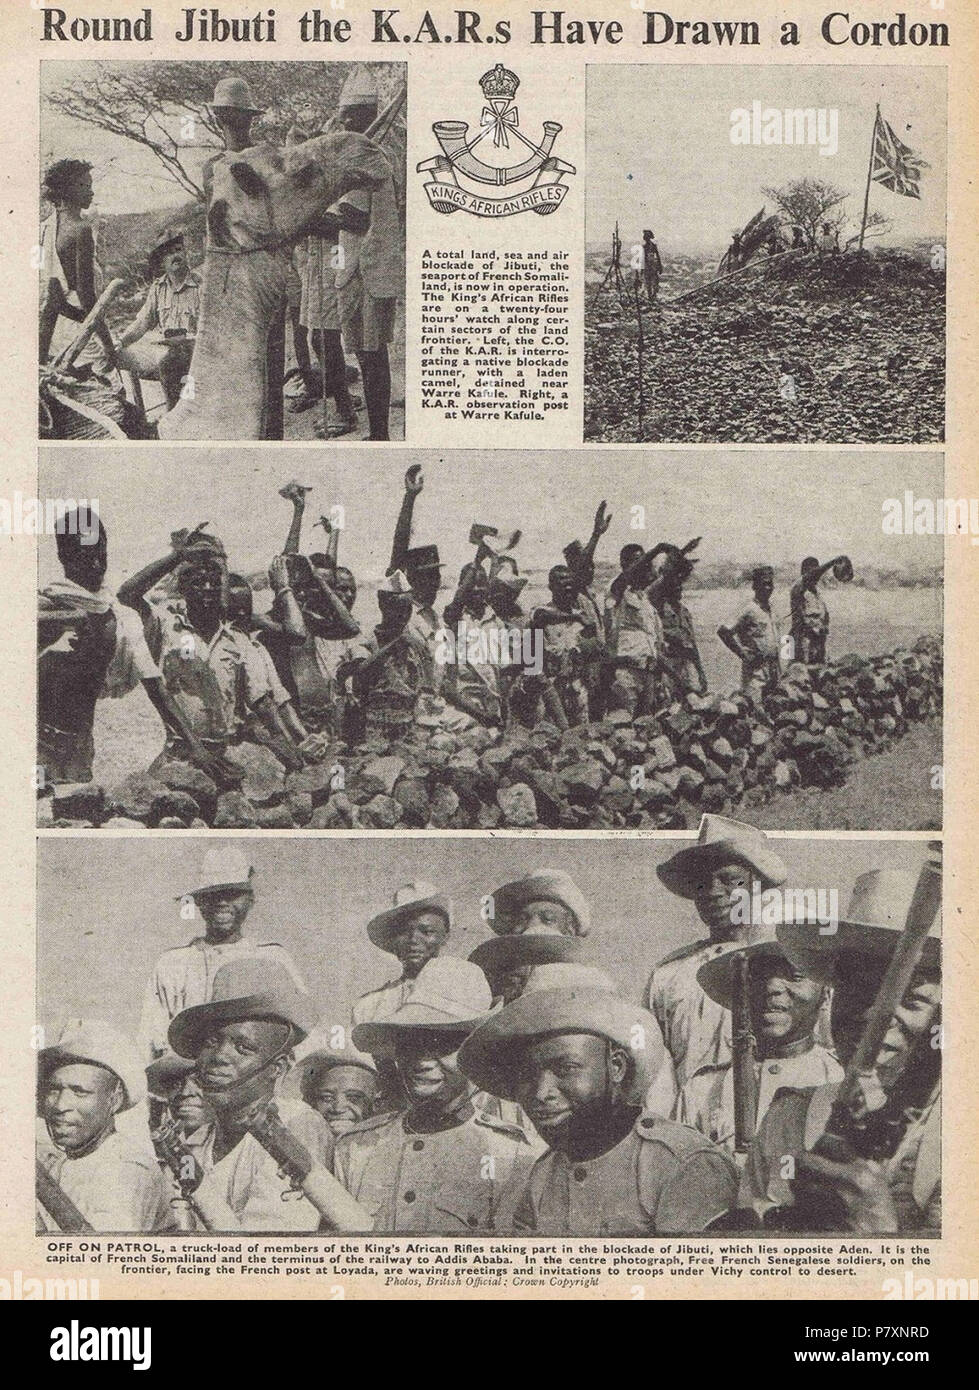 English: Page from a British army publication highlighting episodes of the Allied land blockade of Vichy-controlled French Somaliland, enforced primarily by the King's African Rifles (KAR) from British East Africa. Top, left: Chief Officer of the KAR is interrogating a native blockade runner; Top, right: A KAR observation post at Warre Kafule; Center: Free French Senegalese soldiers deployed on the frontier across from Loyada; and Bottom: a truckload of Tanganyikan soldiers of the KAR. 1941 134 Djibouti blockade 1941 Stock Photo